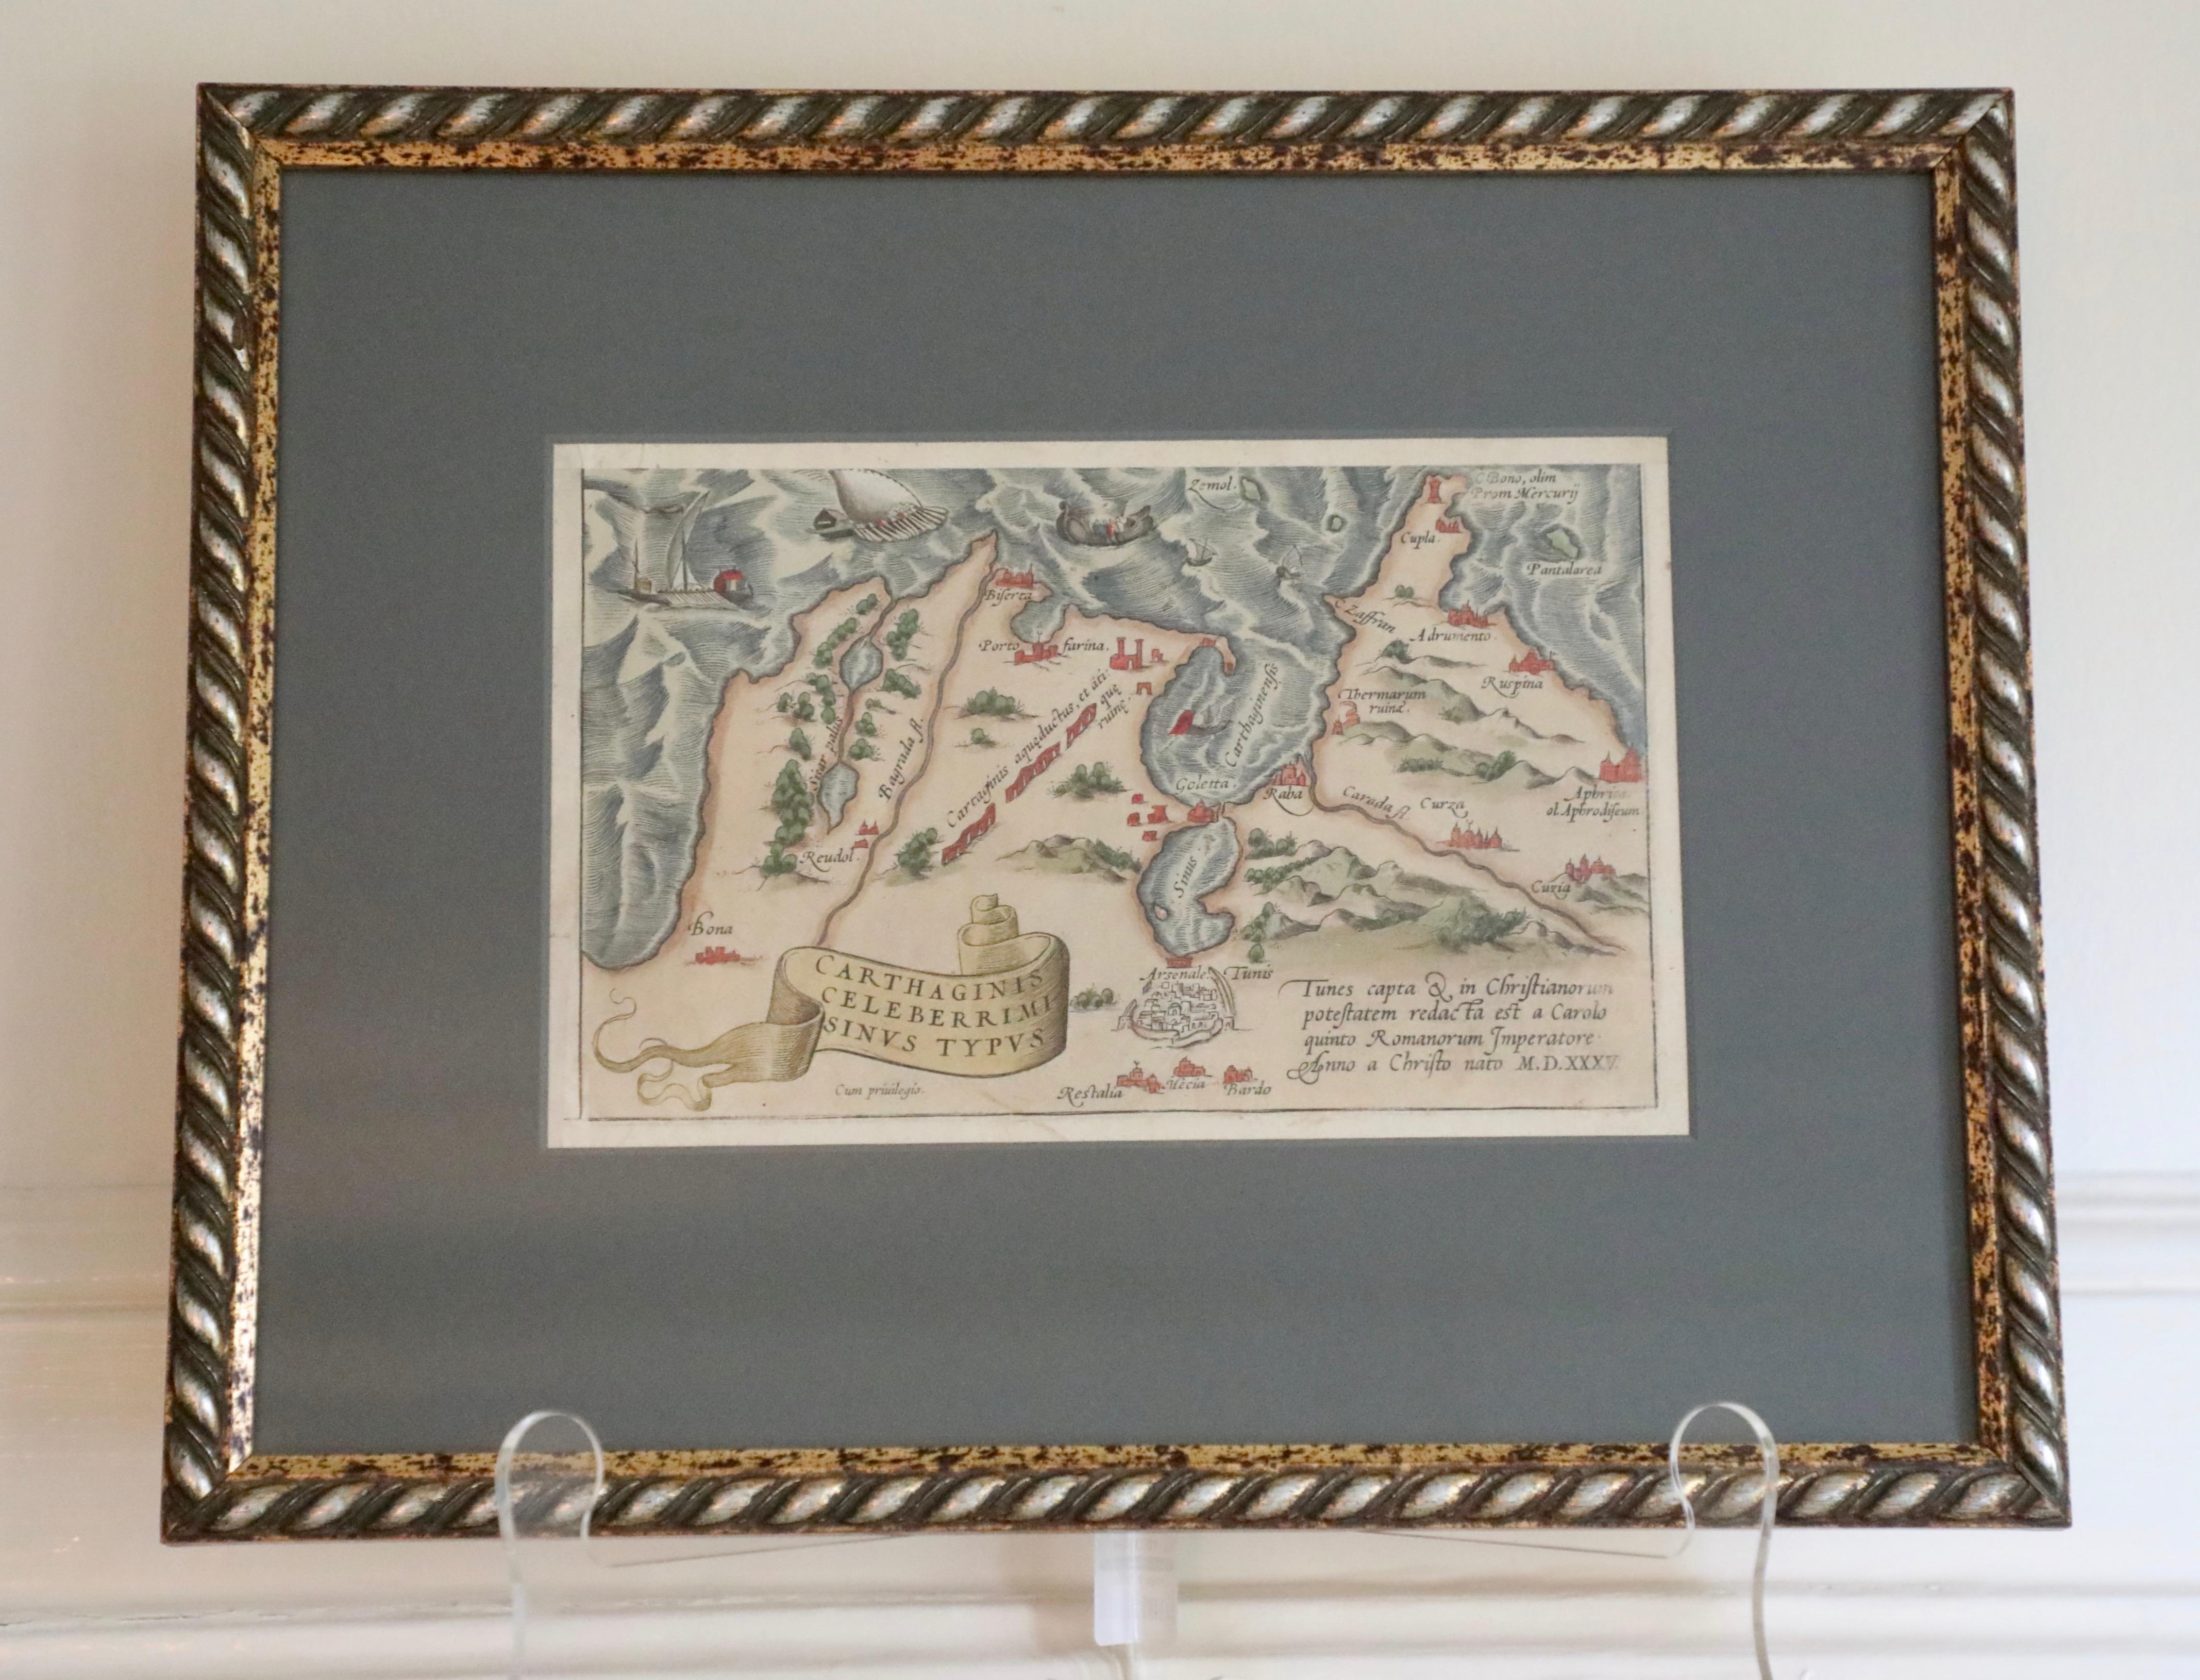 16th Century Hand Colored Engraved Map of Carthage (Tunisia) - Print by Abraham Ortelius